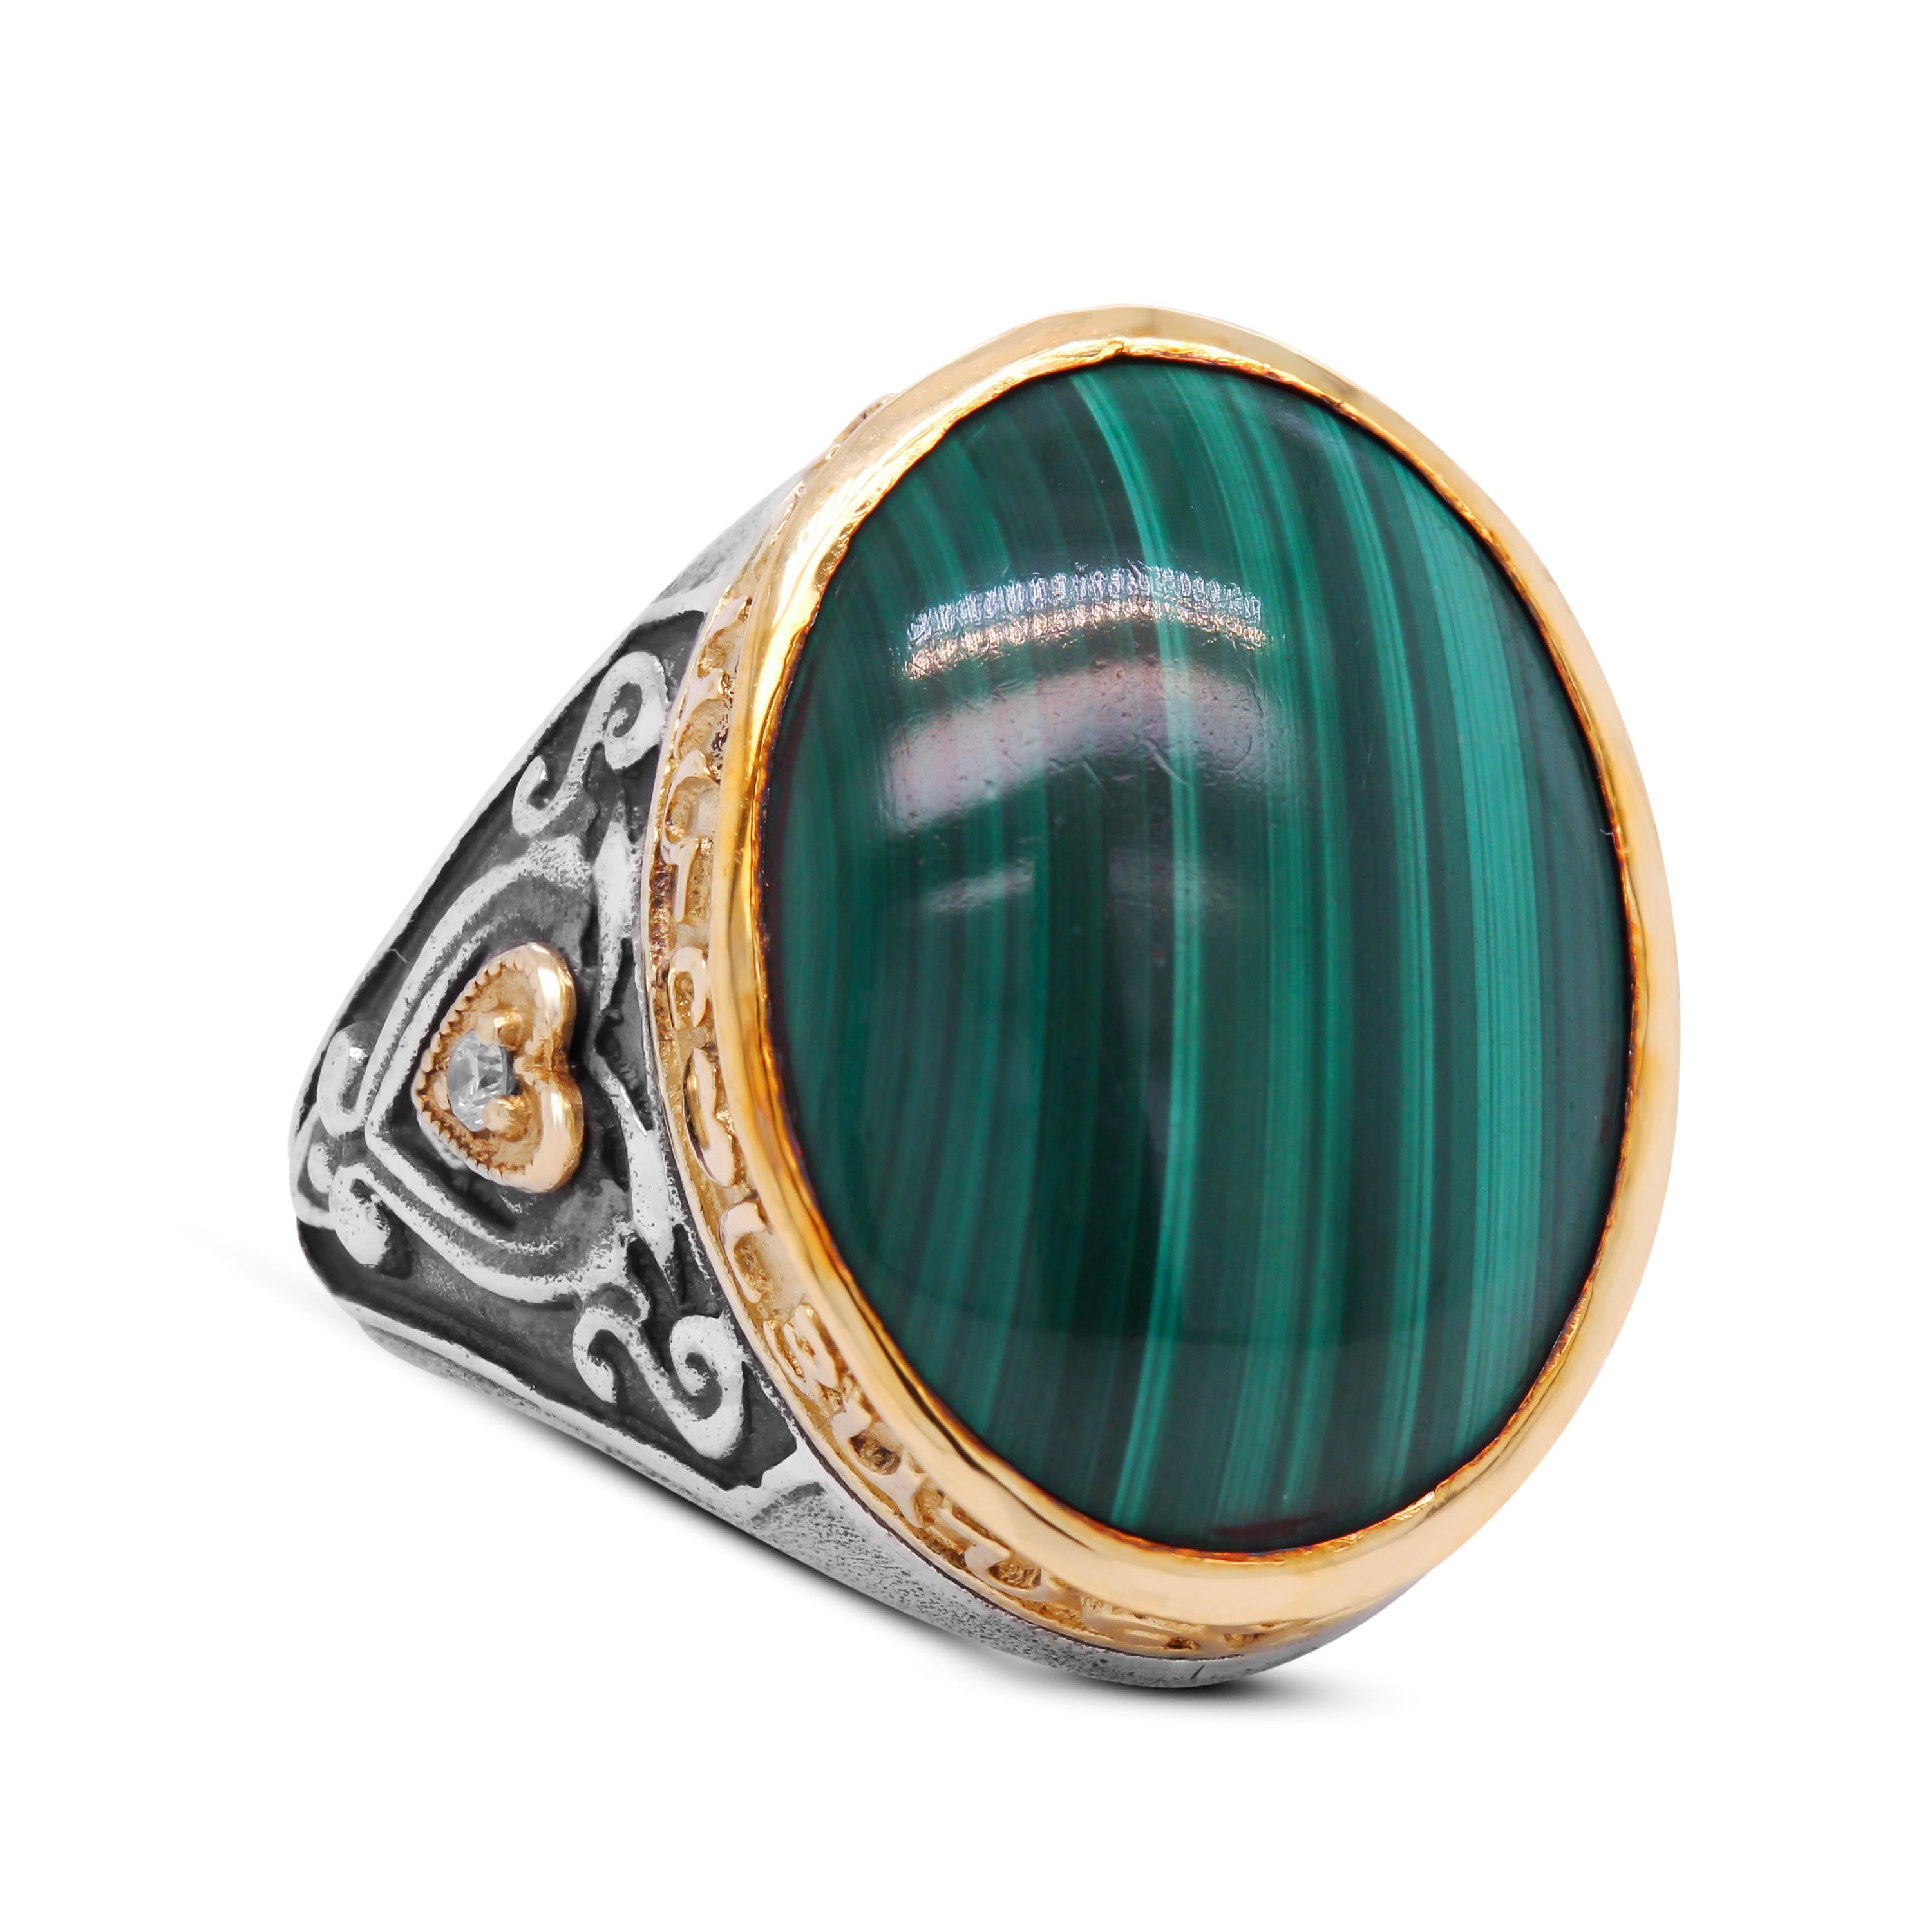 Stambolian Aged Silver 18K Gold Oval Malachite Cocktail Ring

This fun and incredible ring by Stambolian features a unique design work surrounding the center stone with the gold edges written 